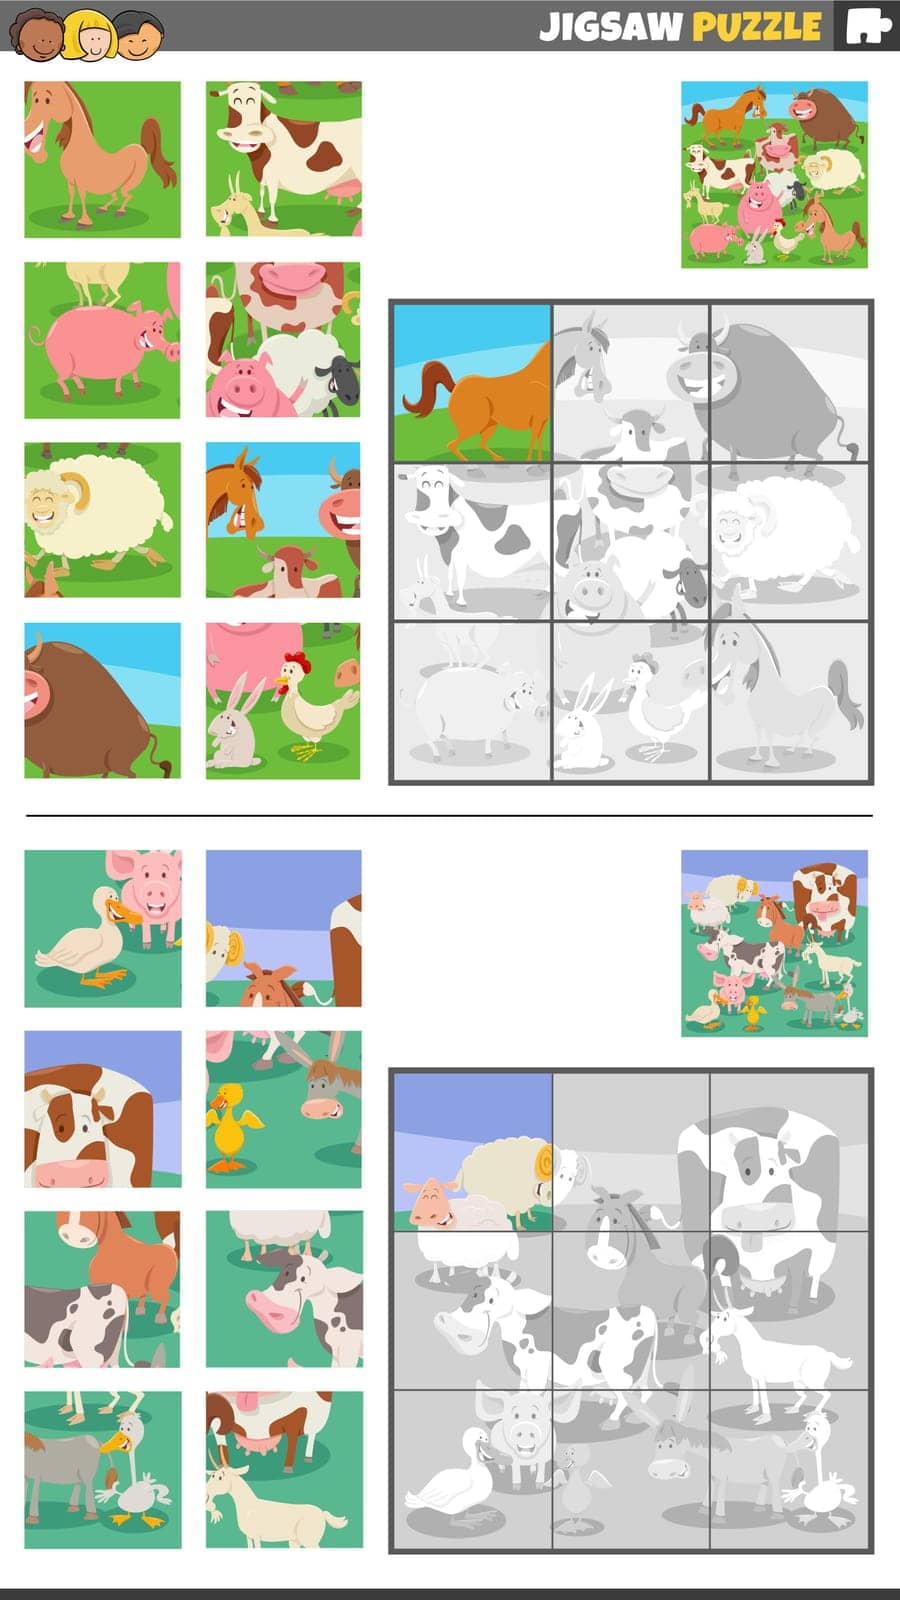 Cartoon illustration of educational jigsaw puzzle games set with farm animals characters group